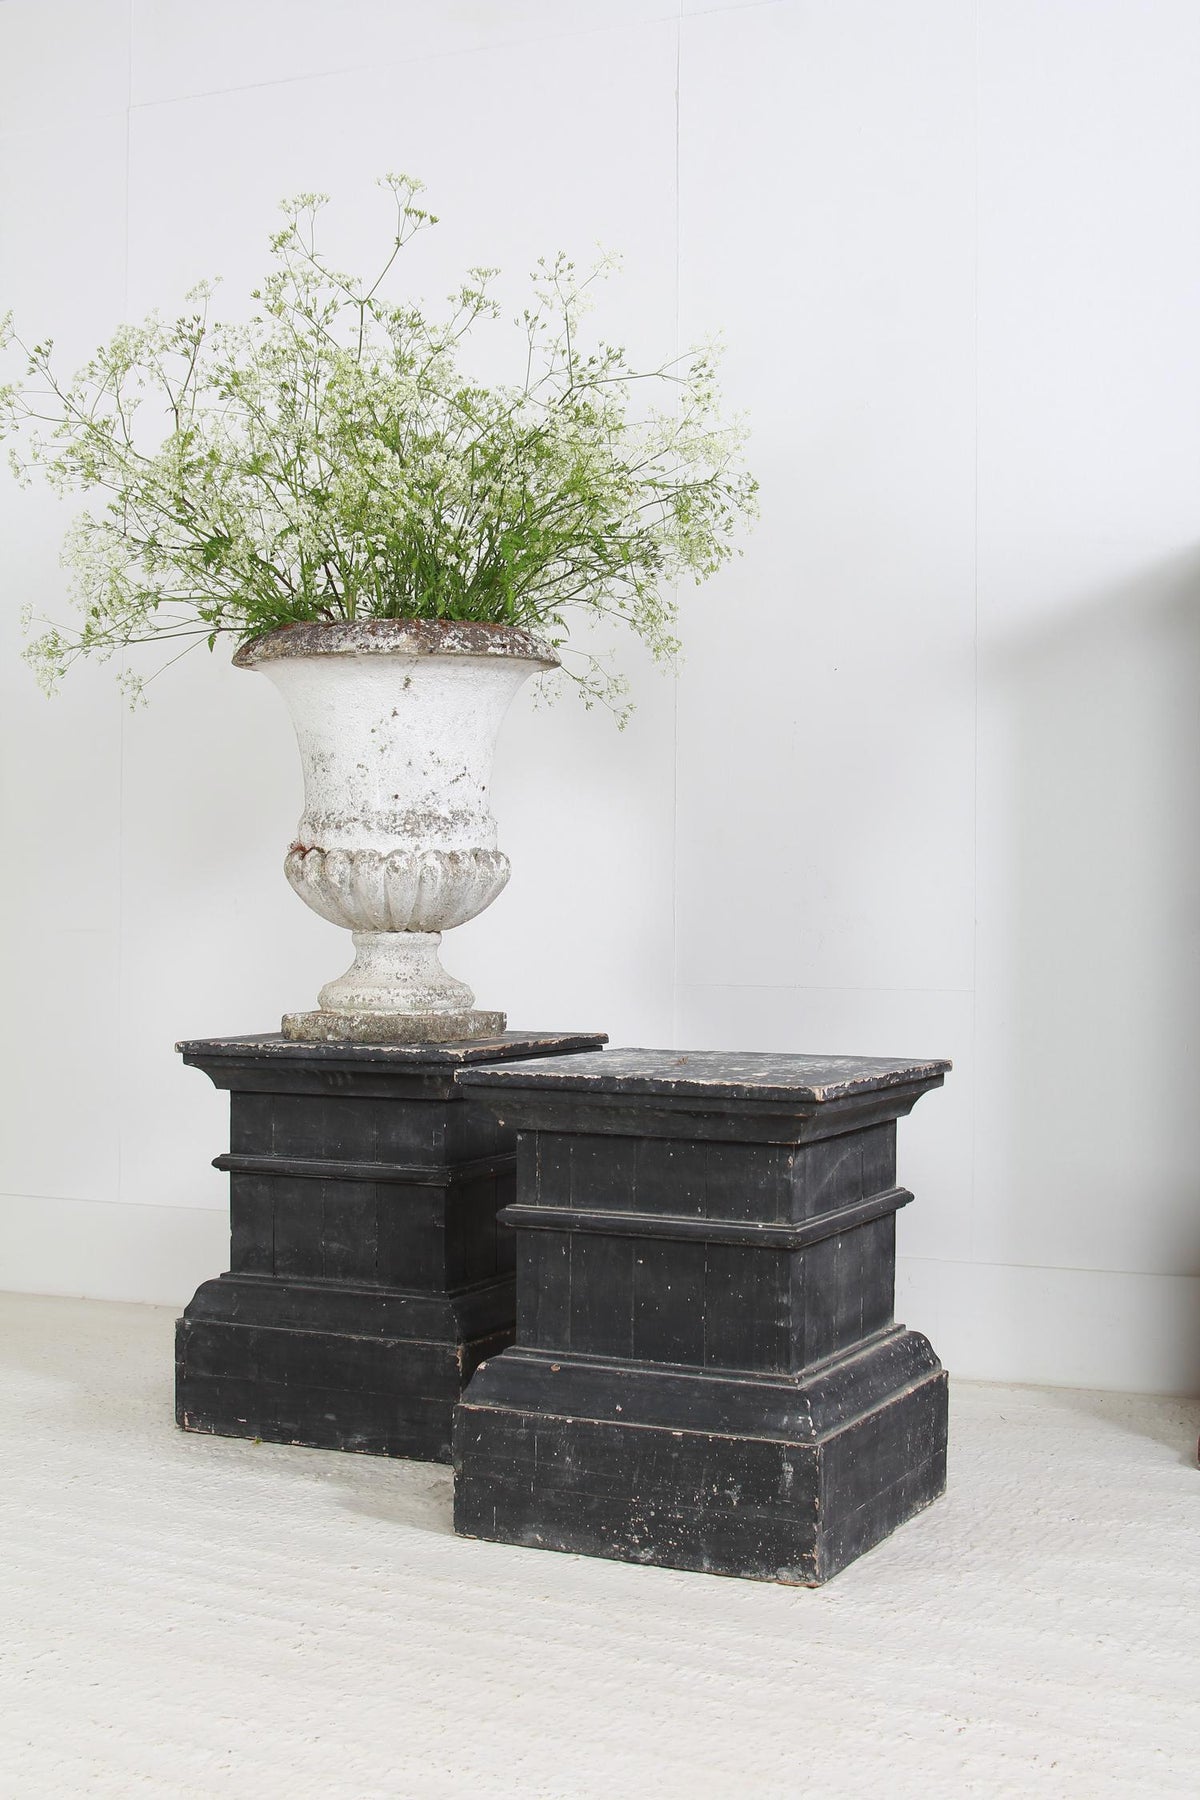 Pair Of Wood Pedestal Sculpture Stands With Nice Old Black Patina